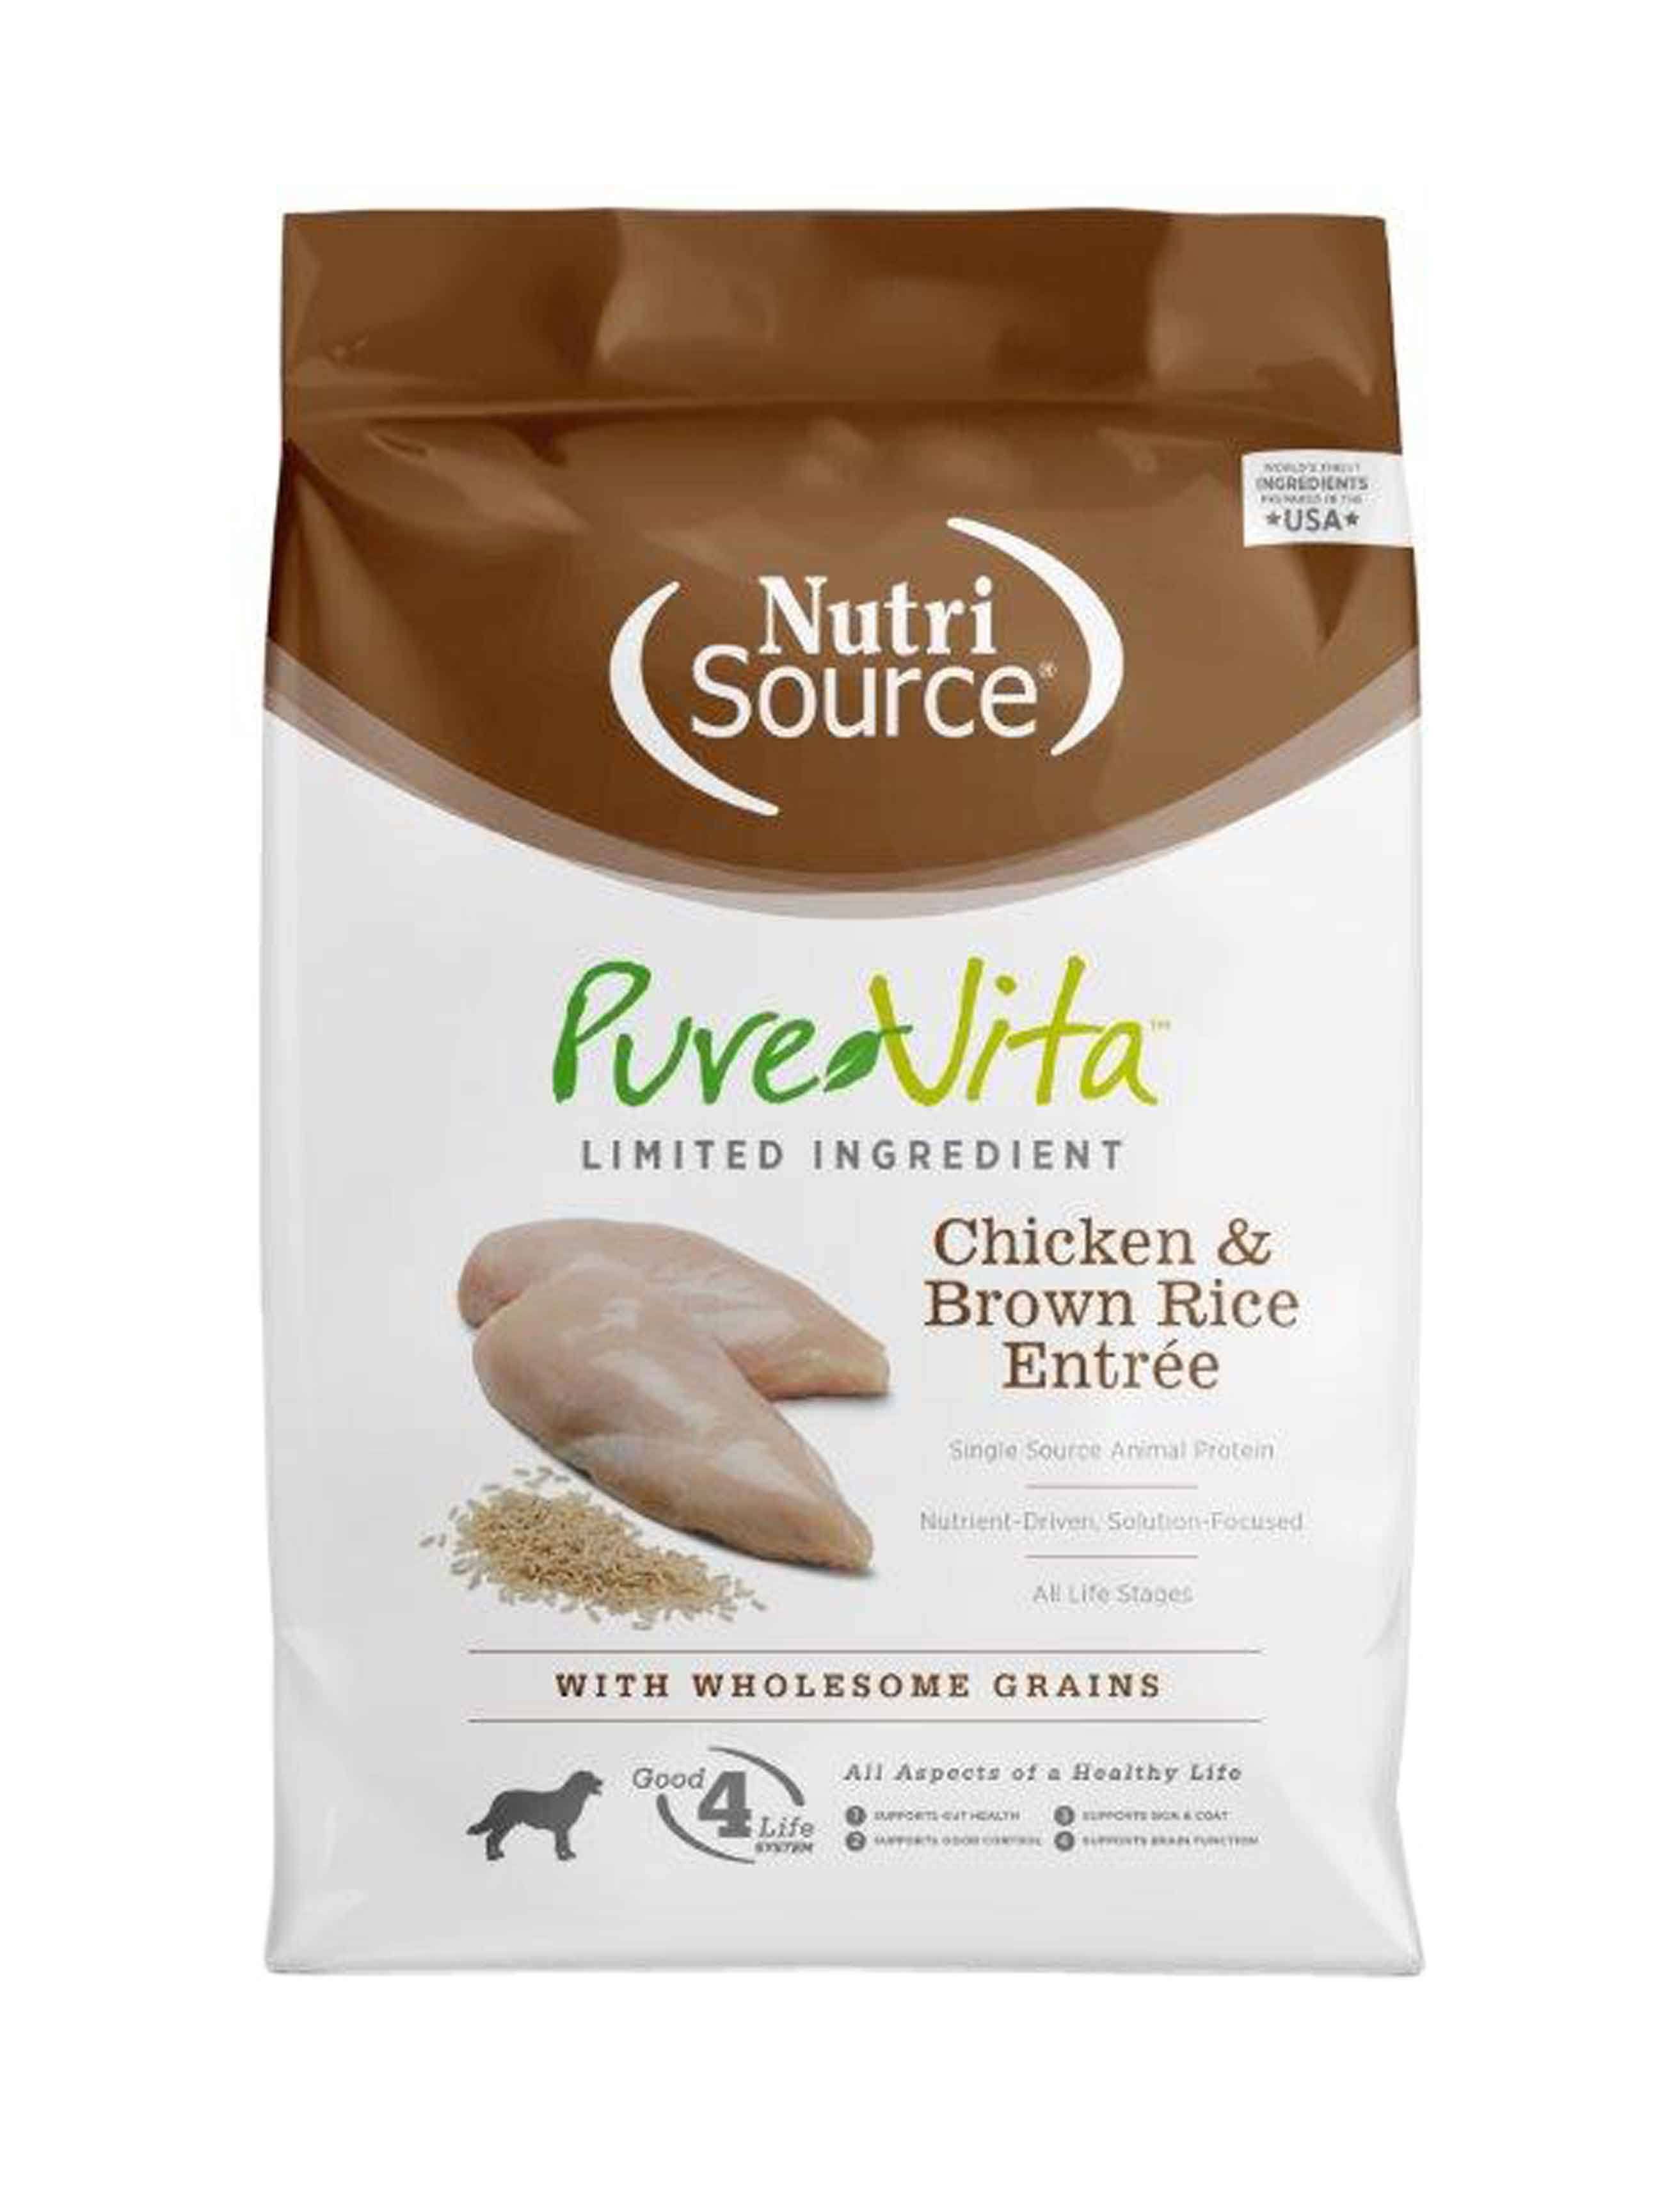 NutriSource Pure Vita Dry Dog Food - Chicken & Brown Rice, 25lb